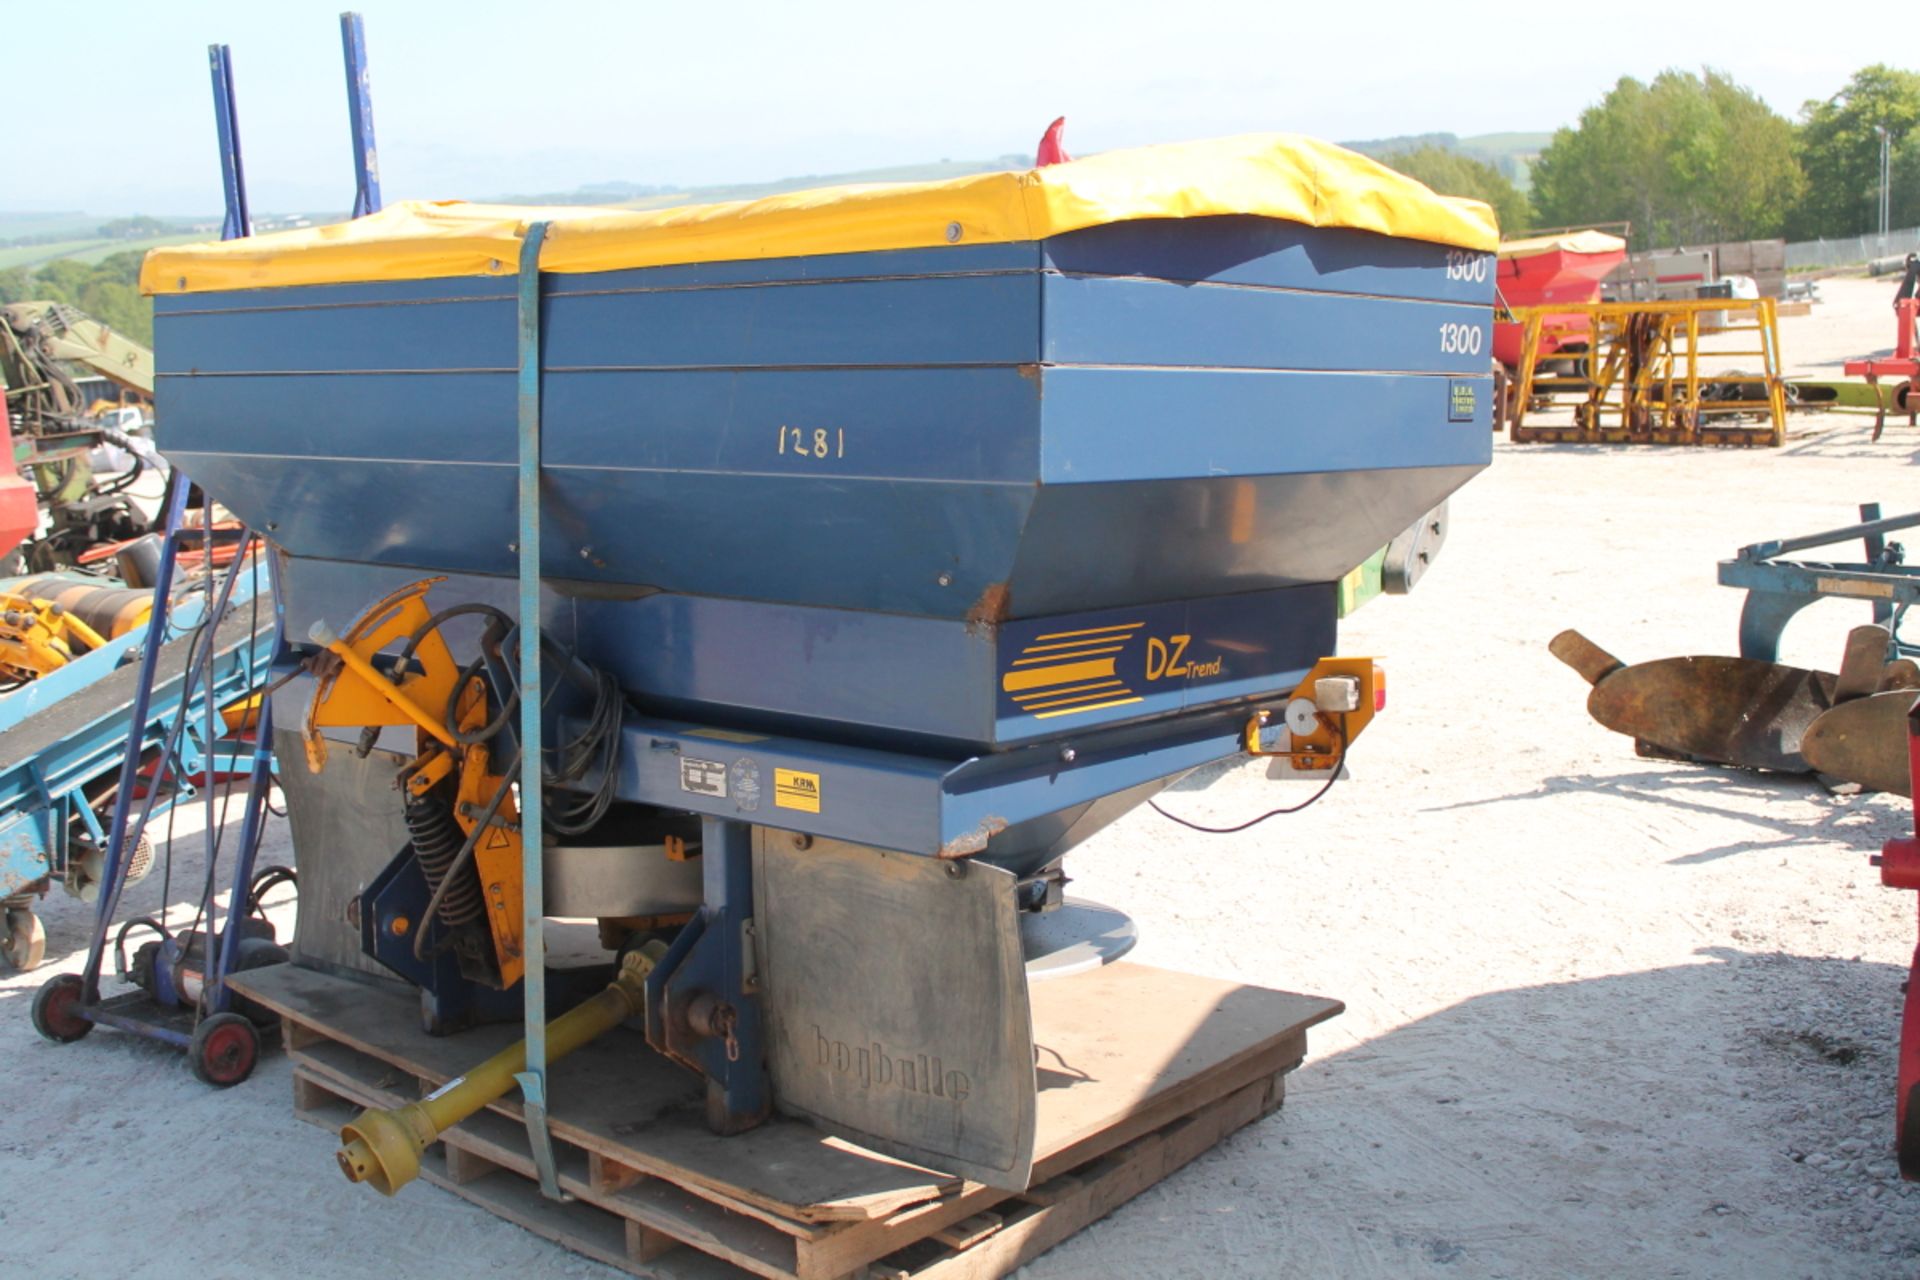 KRM MANURE SPREADER WITH PTO